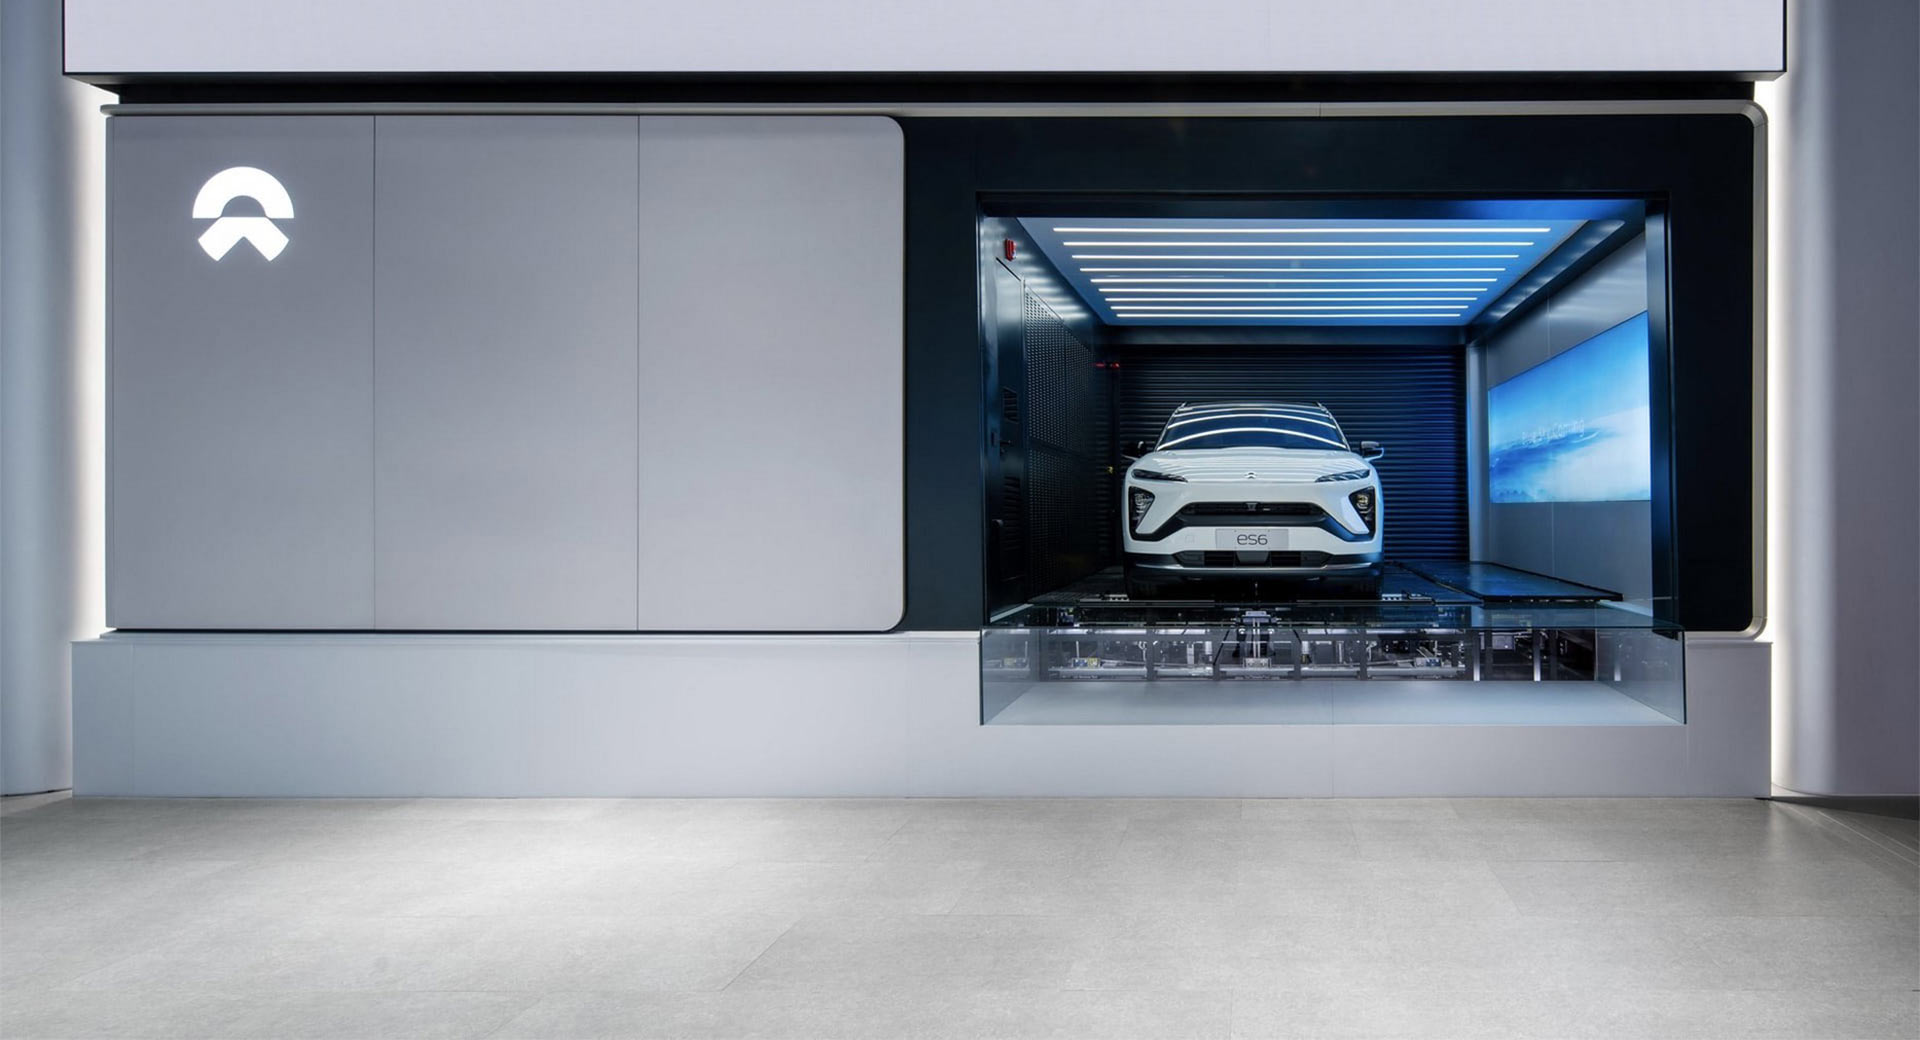 NIO Customers Have Performed Over 4 Million Battery Swaps With Their EVs